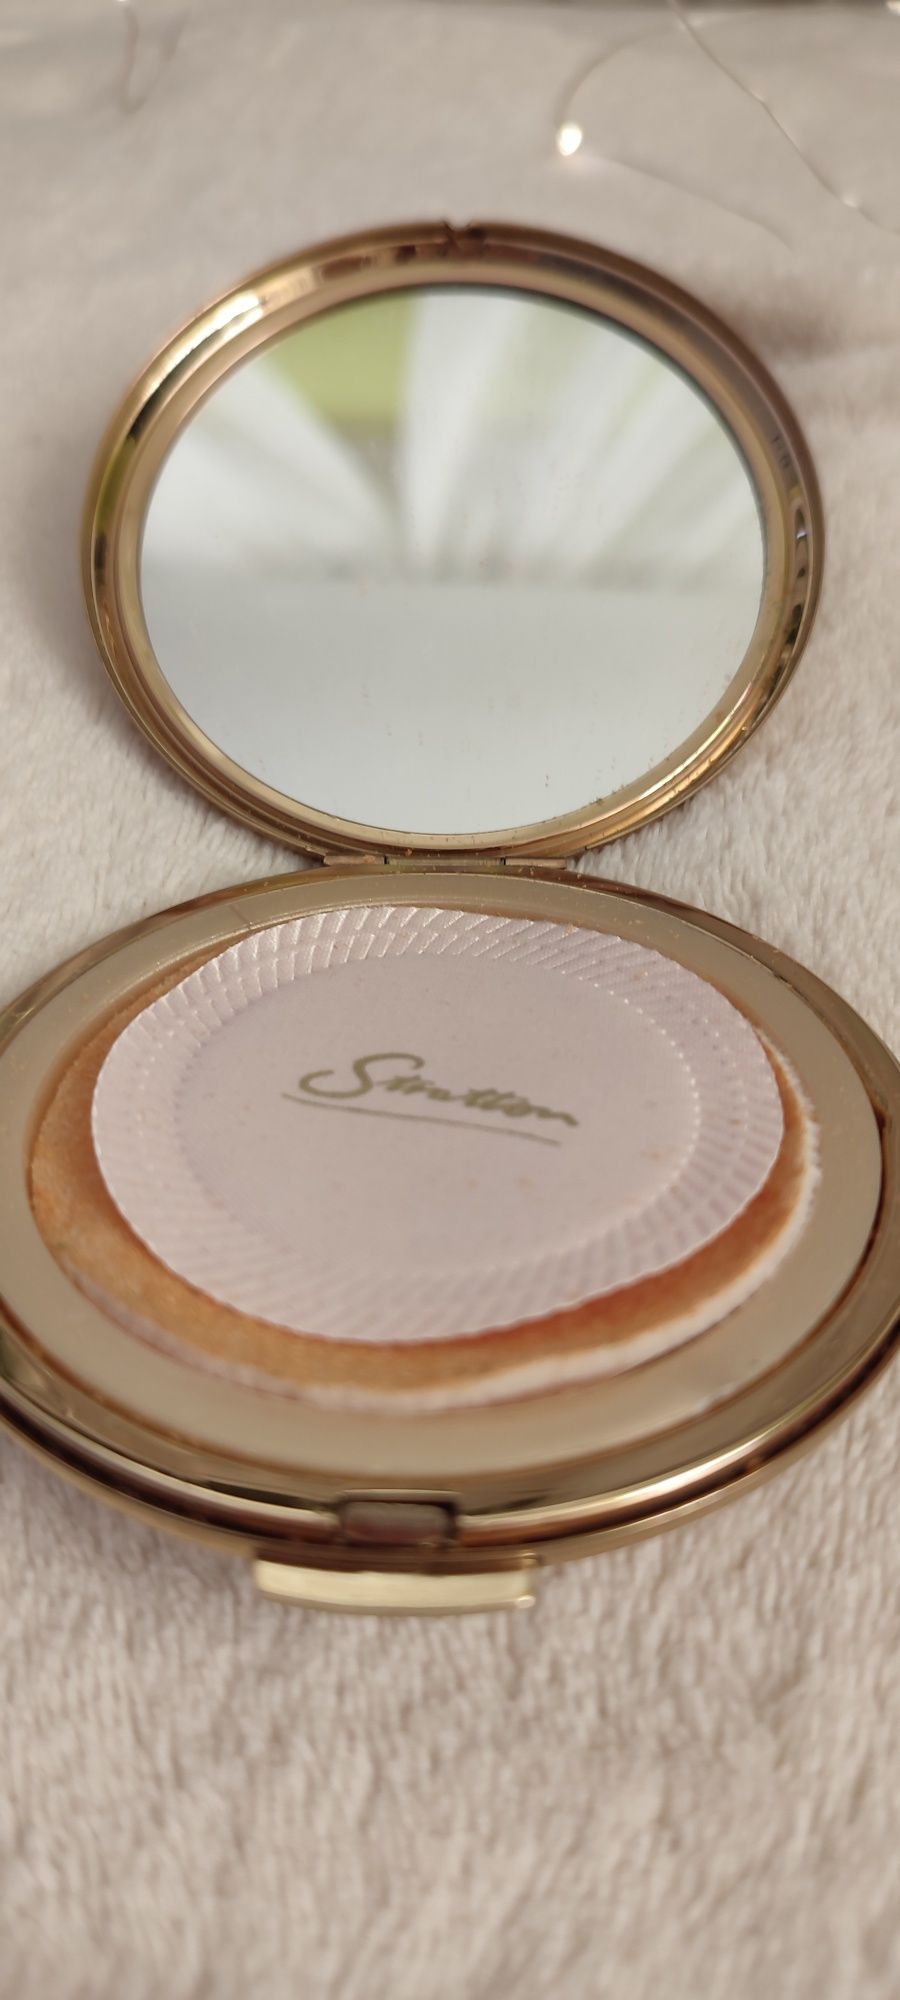 Vintage 1950’s Stratton Made in England Powder Compact Gold Textured